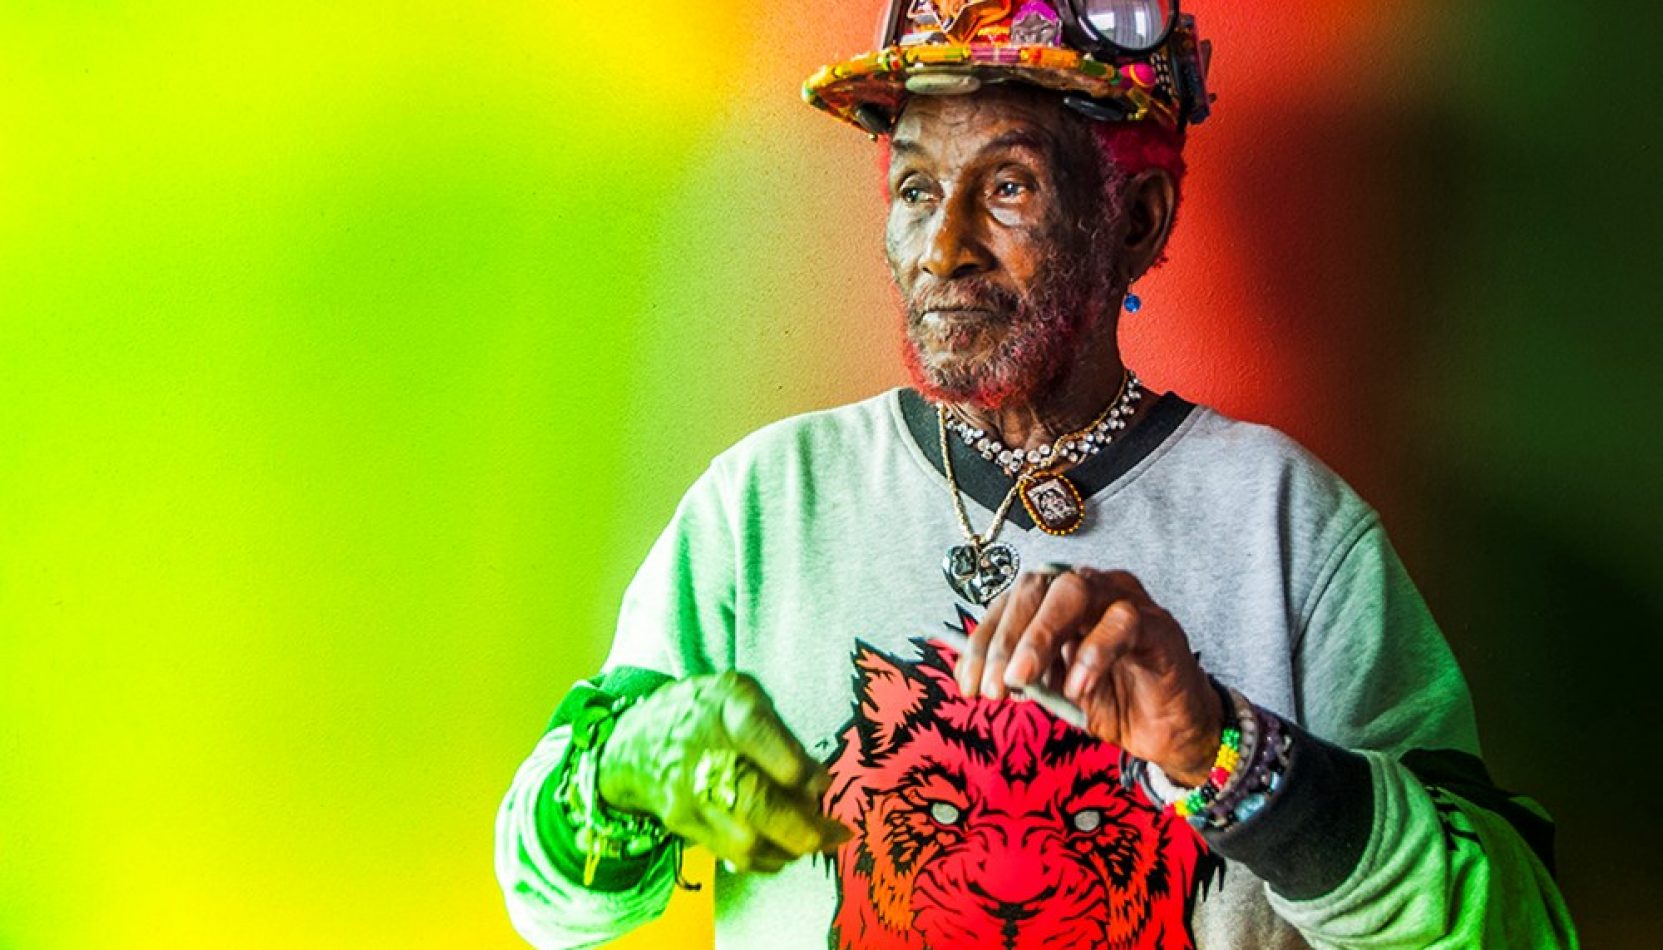 lee scratch perry, dub, reggae, music, live music, gig, the boileroom, guildford, surrey, whats on, guide to whats on, guide to surrey, march 2020